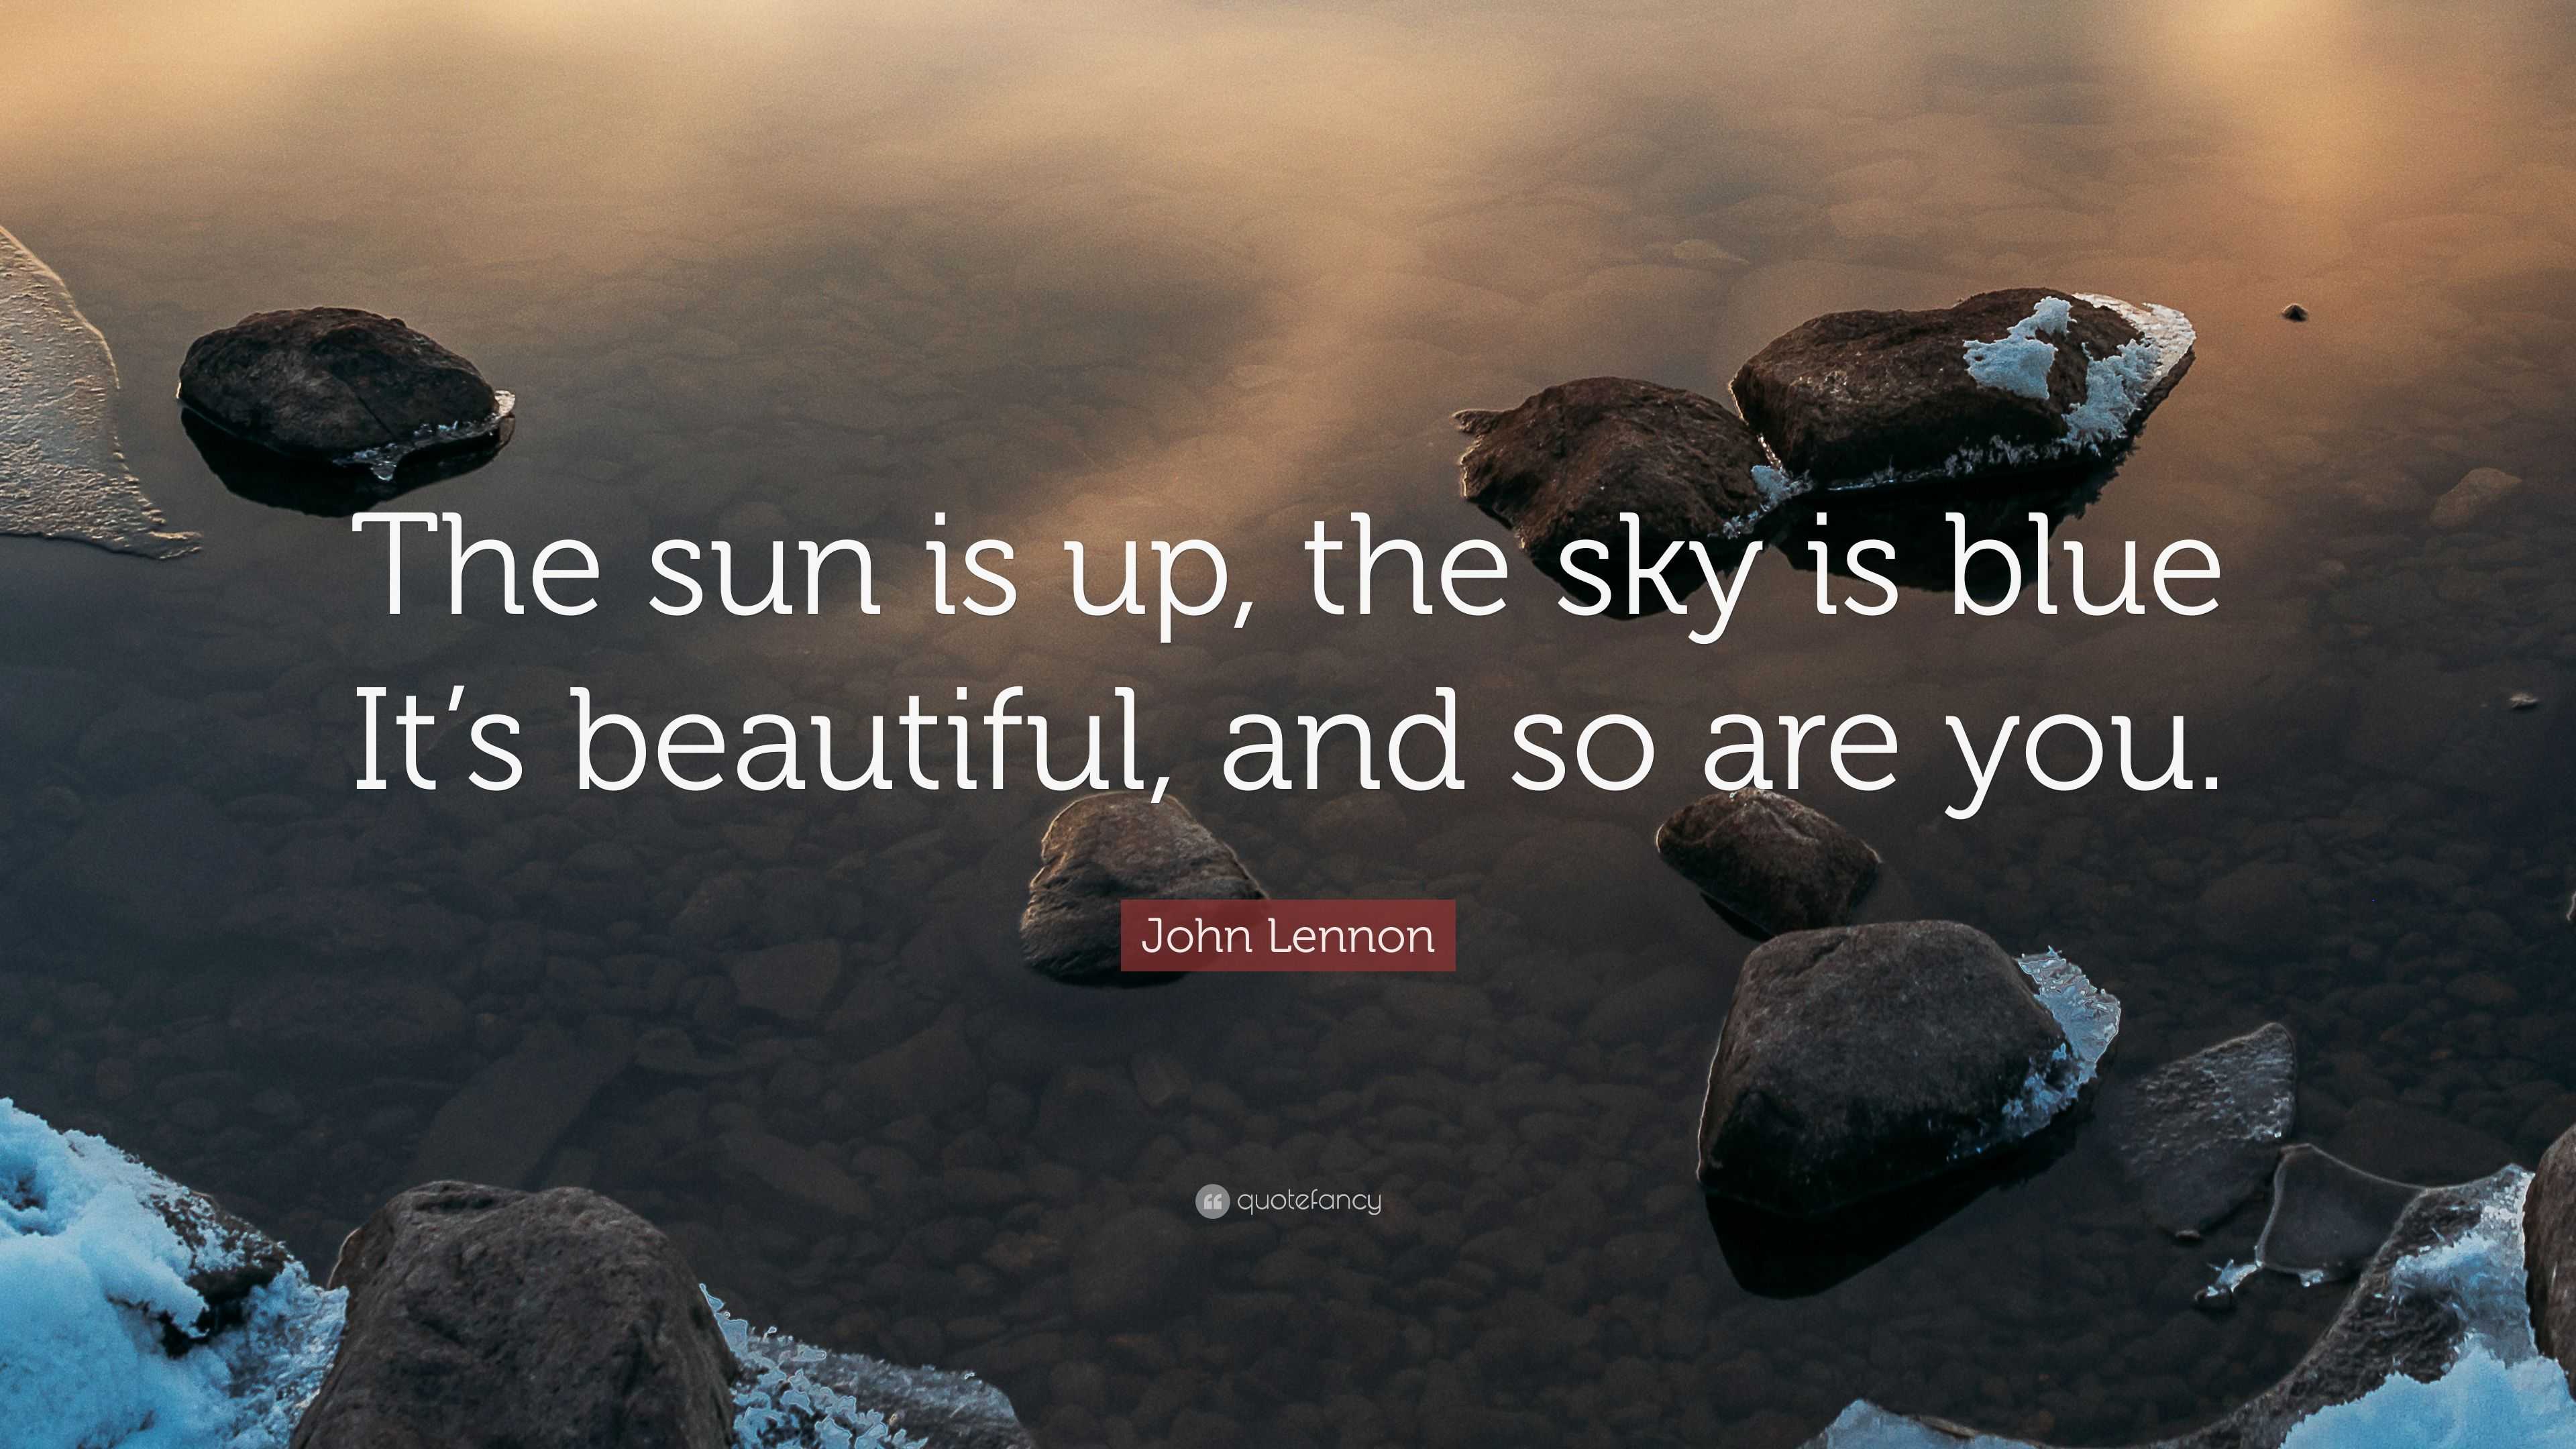 John Lennon Quote: “The sun is up, the sky is blue It’s beautiful, and